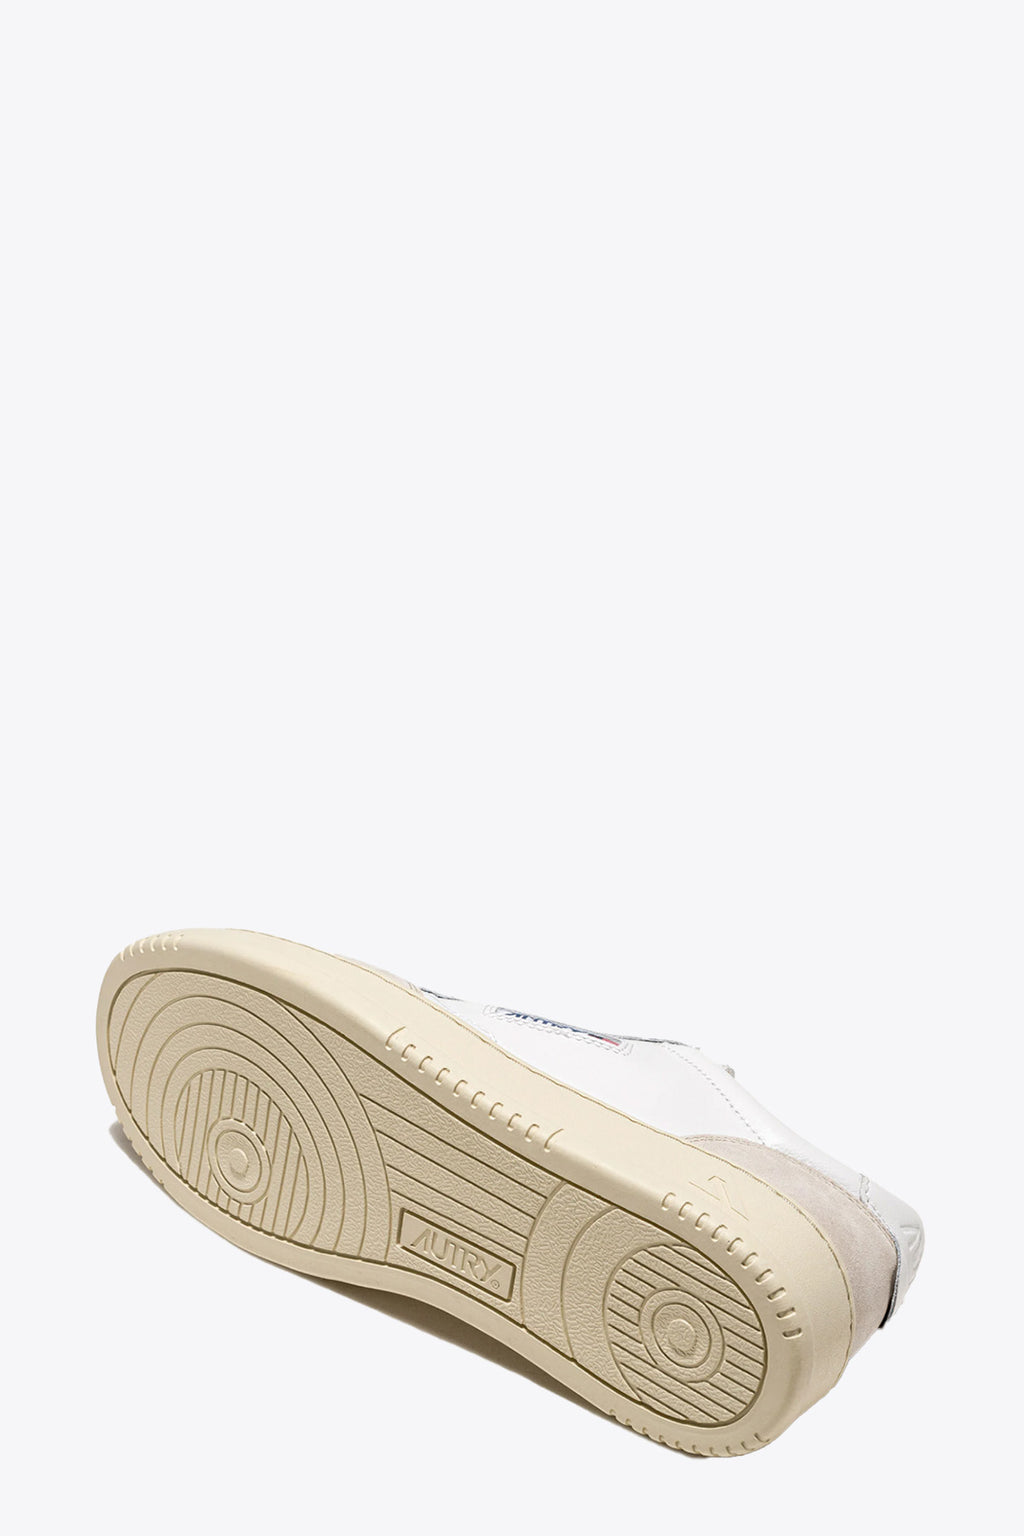 alt-image__White-leather-low-sneaker-with-suede-detail---Medalist